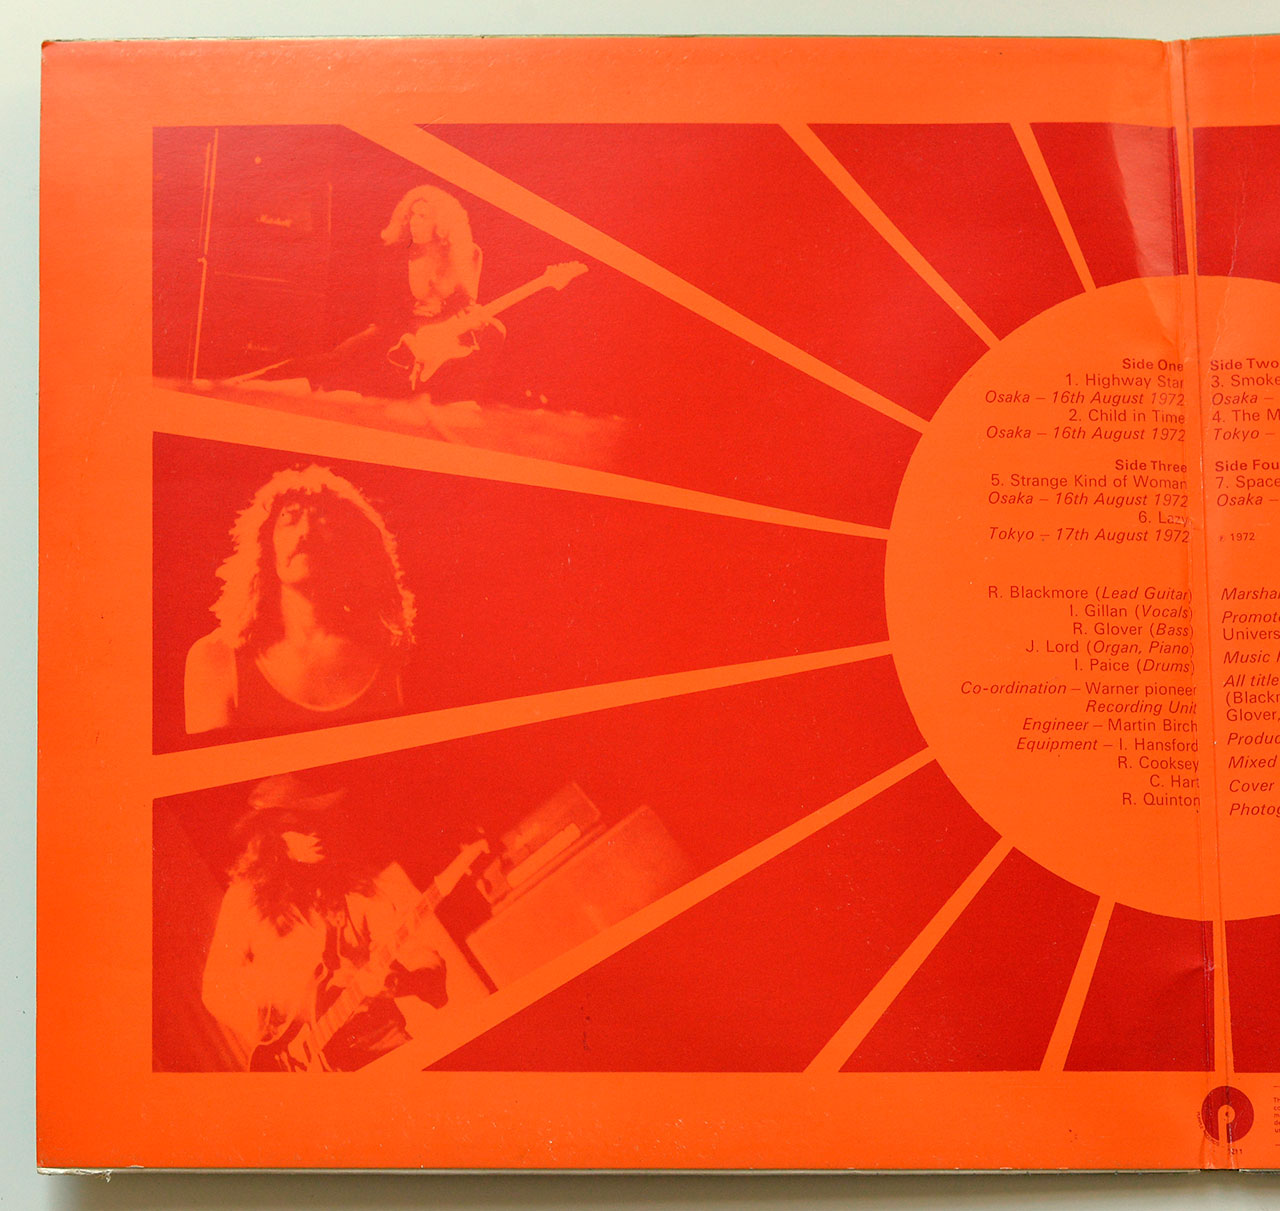 High Resolution Photo of the Inside Page of the Gatefold Cover Side One of DEEP PURPLE - Made in Japan (Netherlands) https://vinyl-records.nl